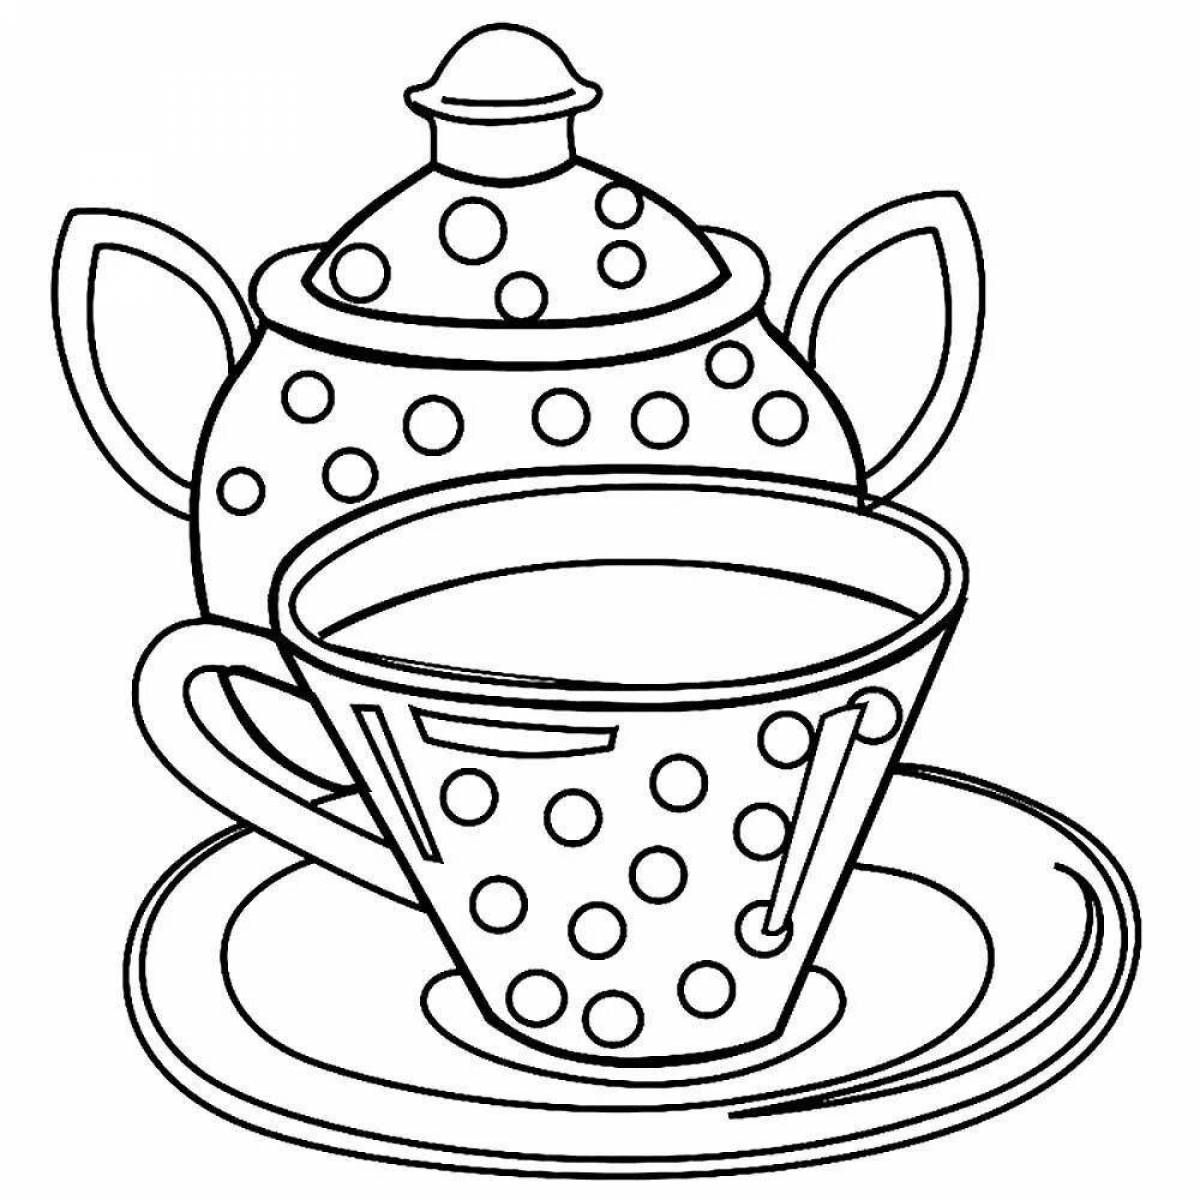 Cute mugs and cups coloring page